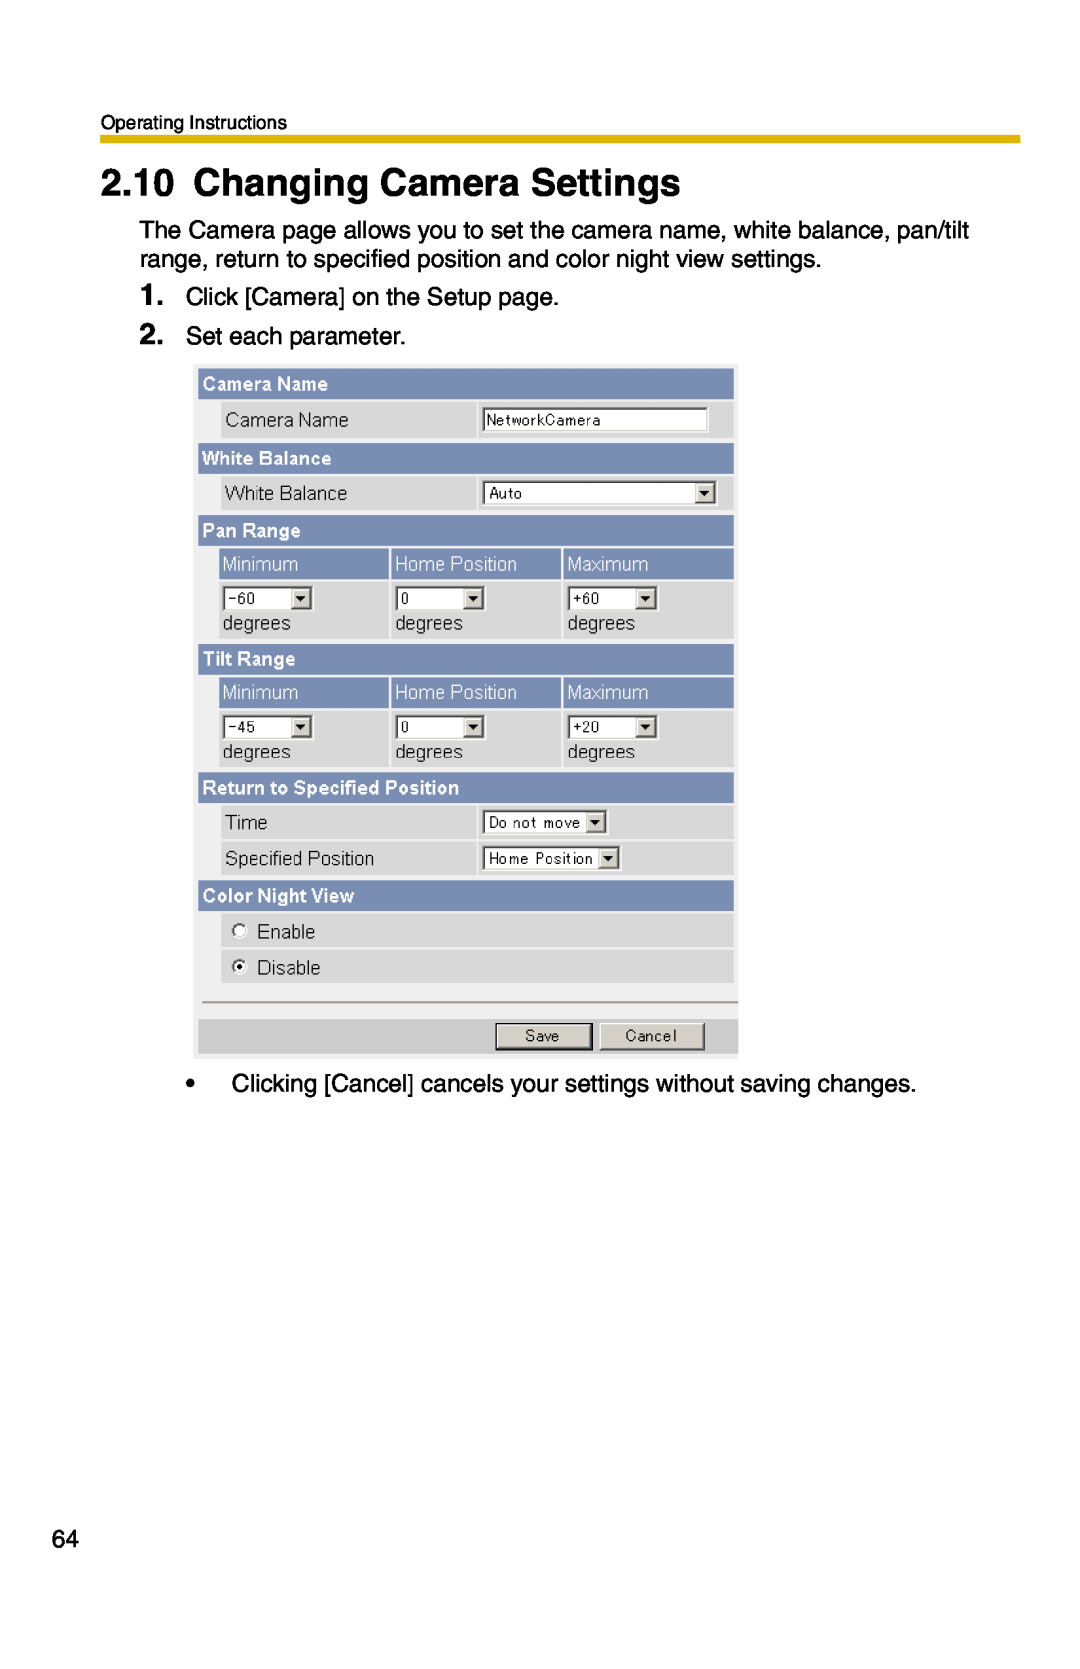 Panasonic BB-HCM331A operating instructions Changing Camera Settings, Click Camera on the Setup page 2. Set each parameter 